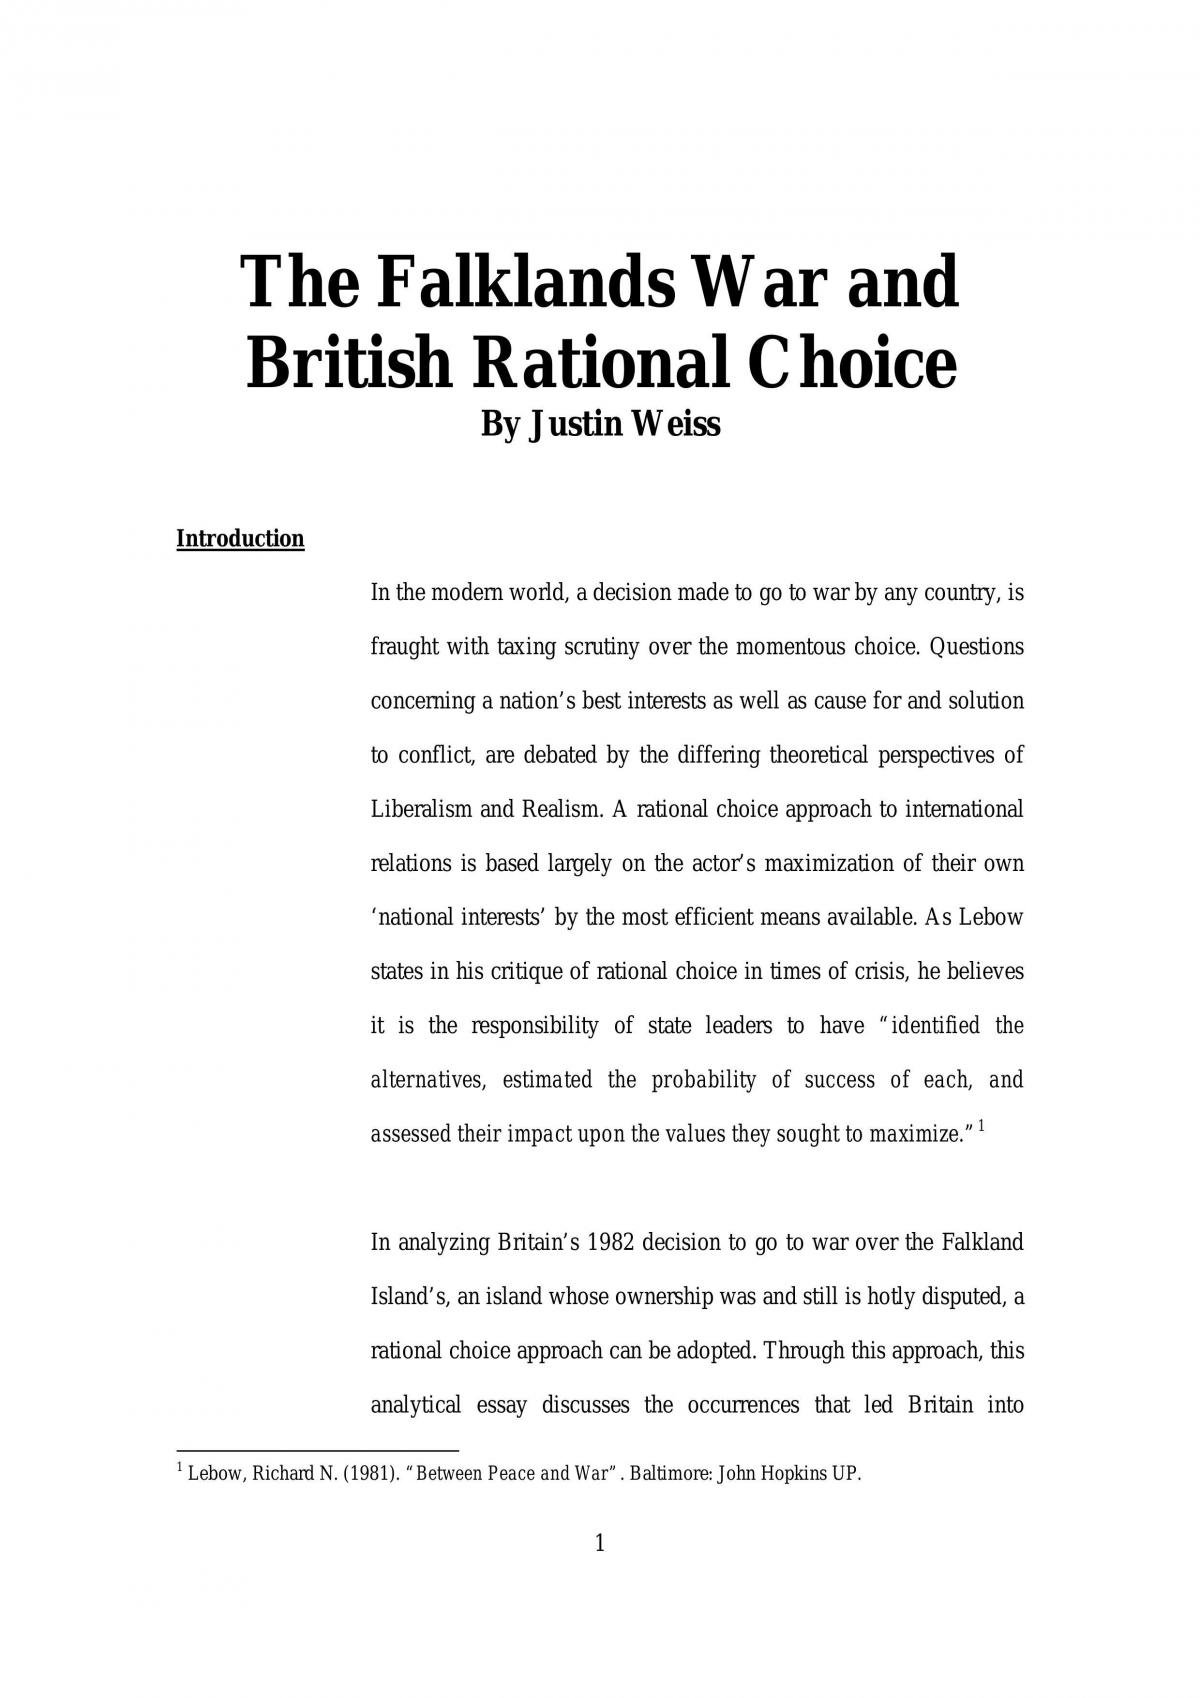 40% Assignment - Falklands War And British Rational Choice. - Page 1